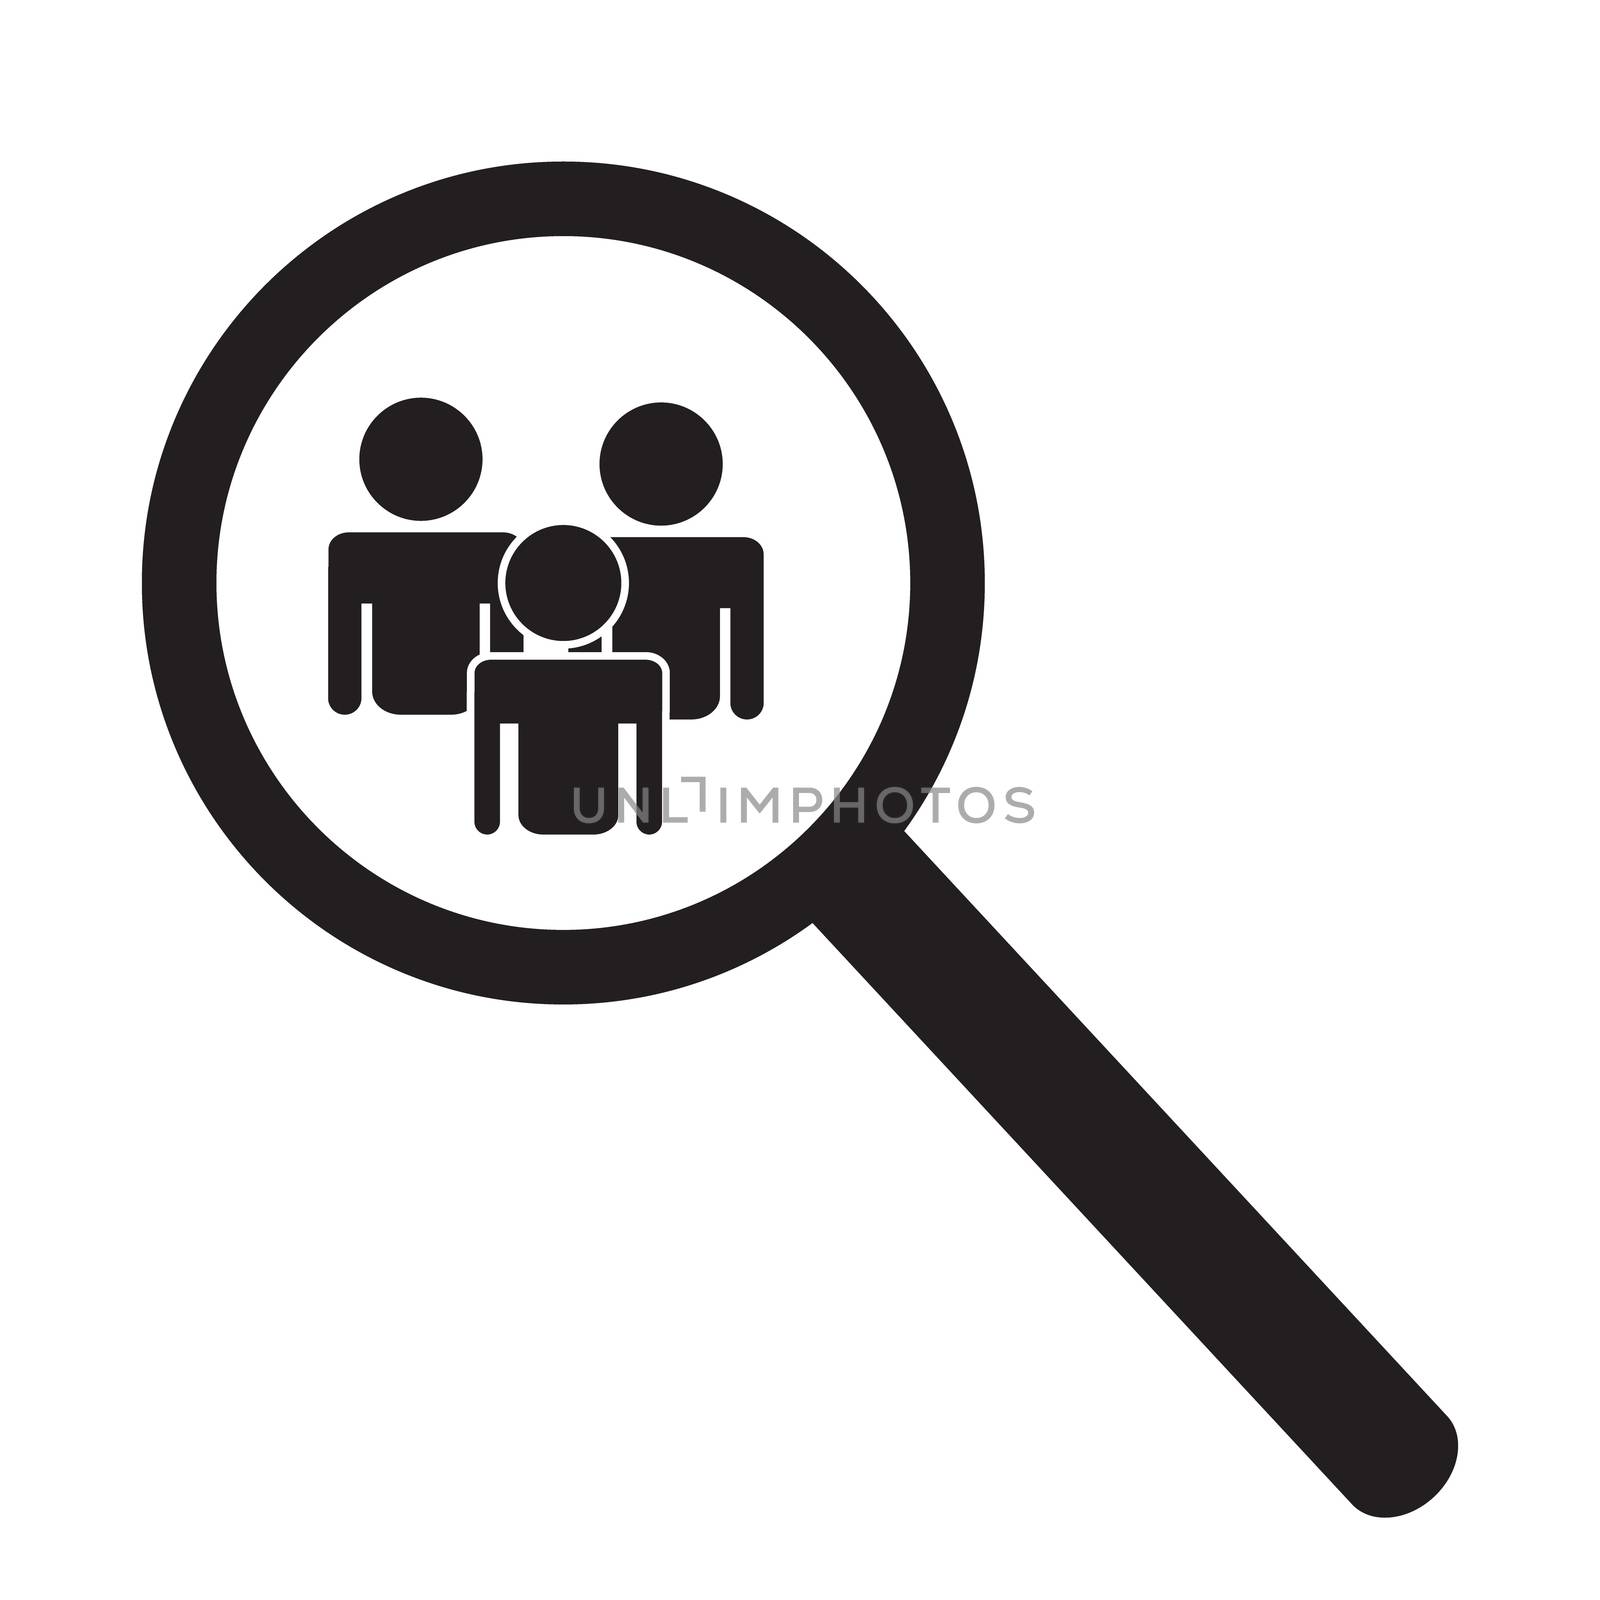 search people icon. magnifier glass searching people. search people icon for your web site design, logo, app, UI.